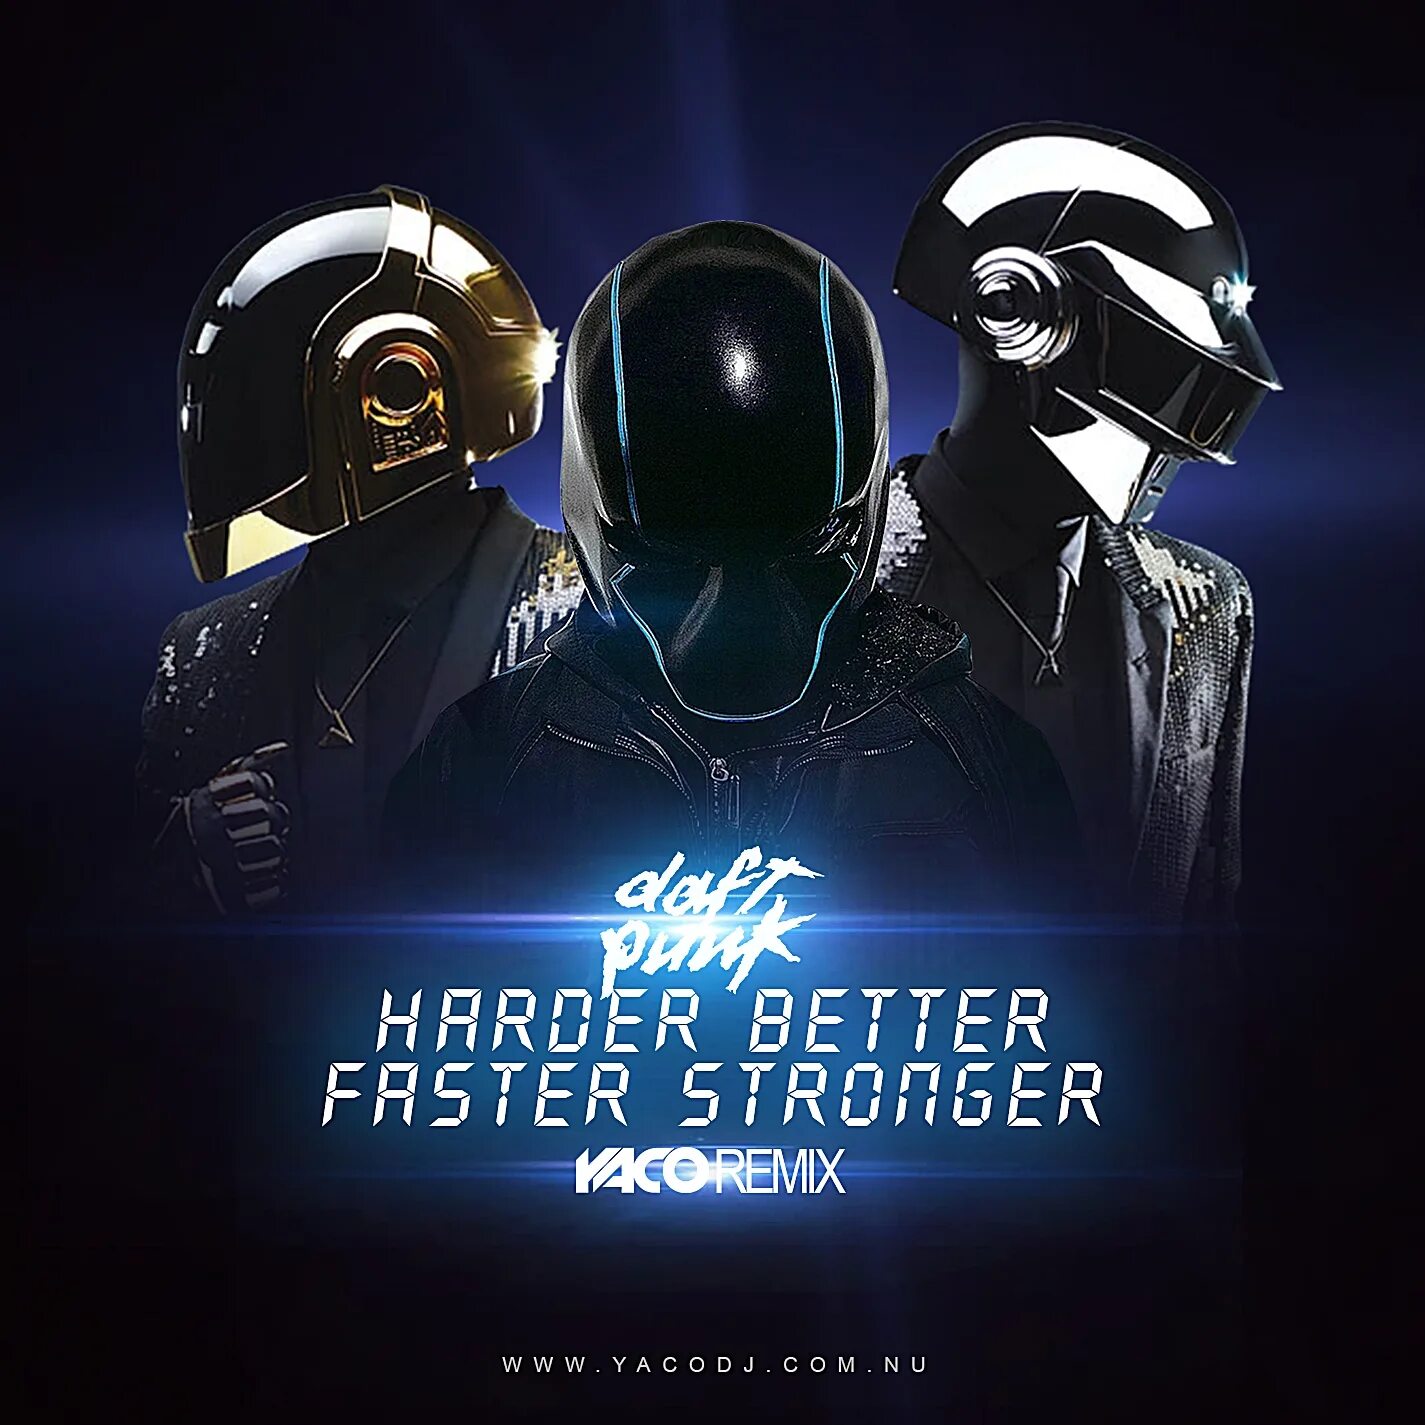 Faster and harder текст. Дафт панк стронгер. Дафт панк Хардер беттер. Harder better faster stronger. Хардер беттер Фастер стронгер.